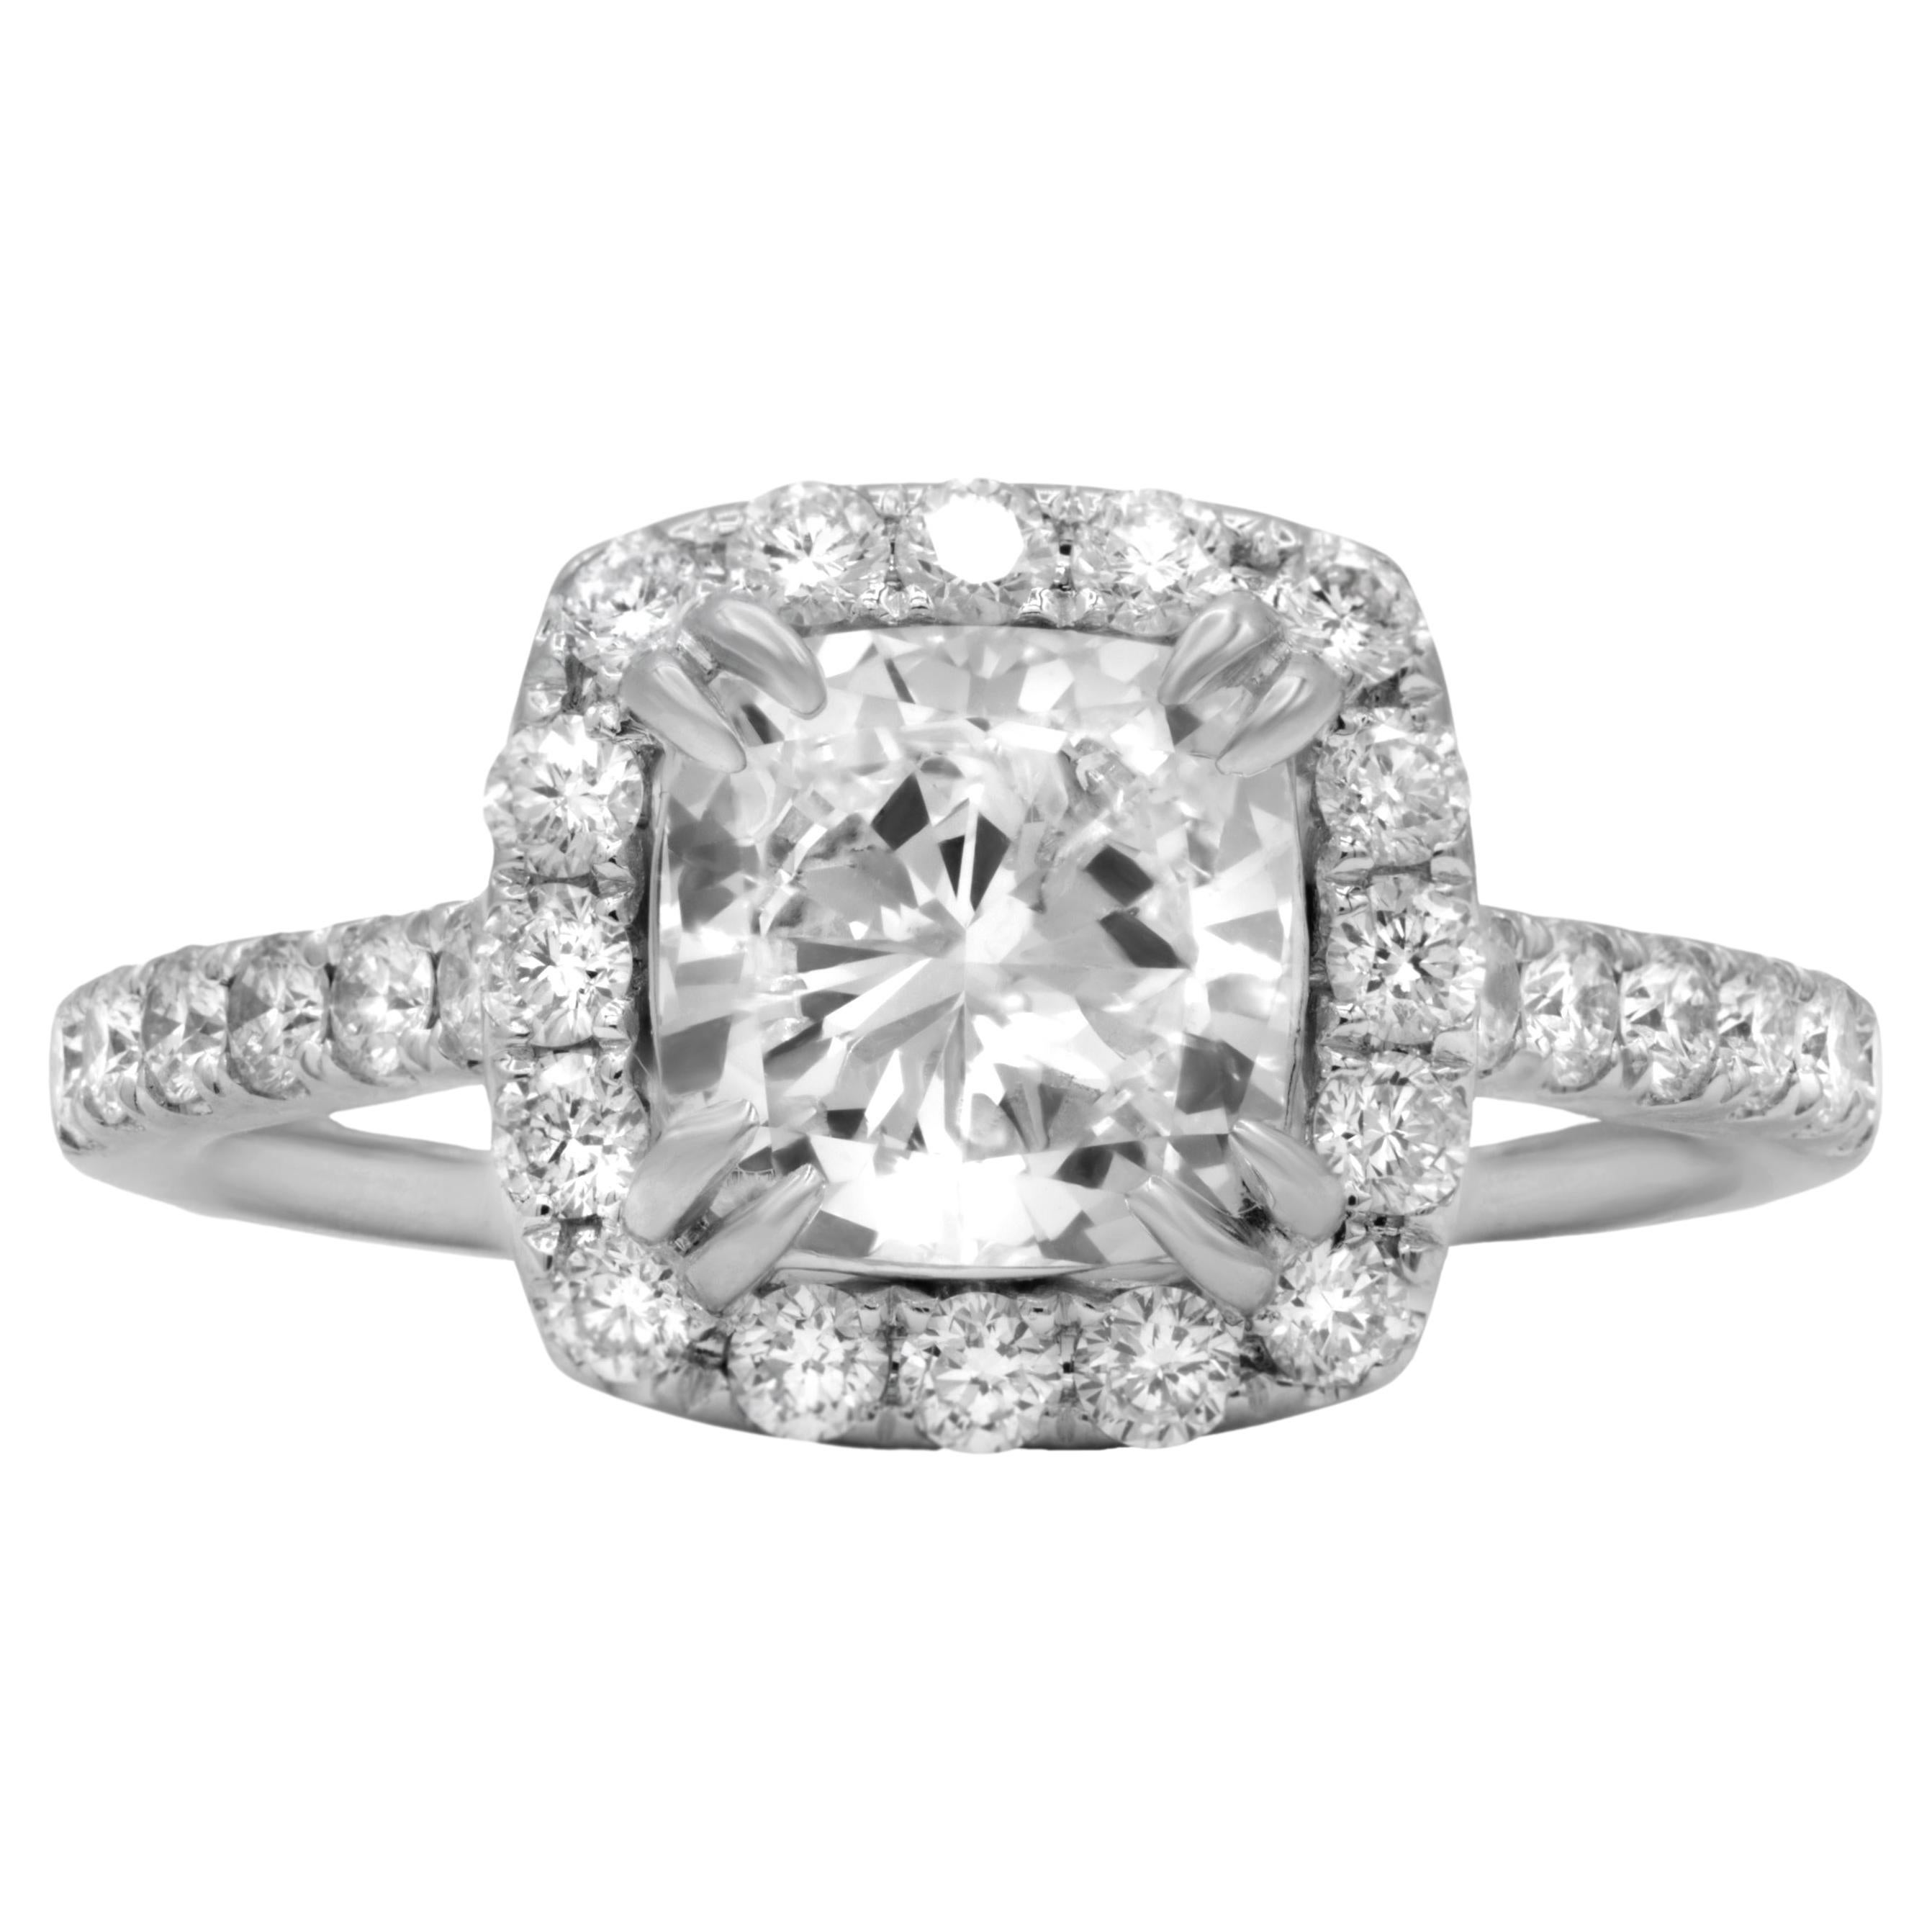 Diana M. 1.70ct Center Cushion Diamond H-Color VS2 Clarity Set In White Gold For Sale